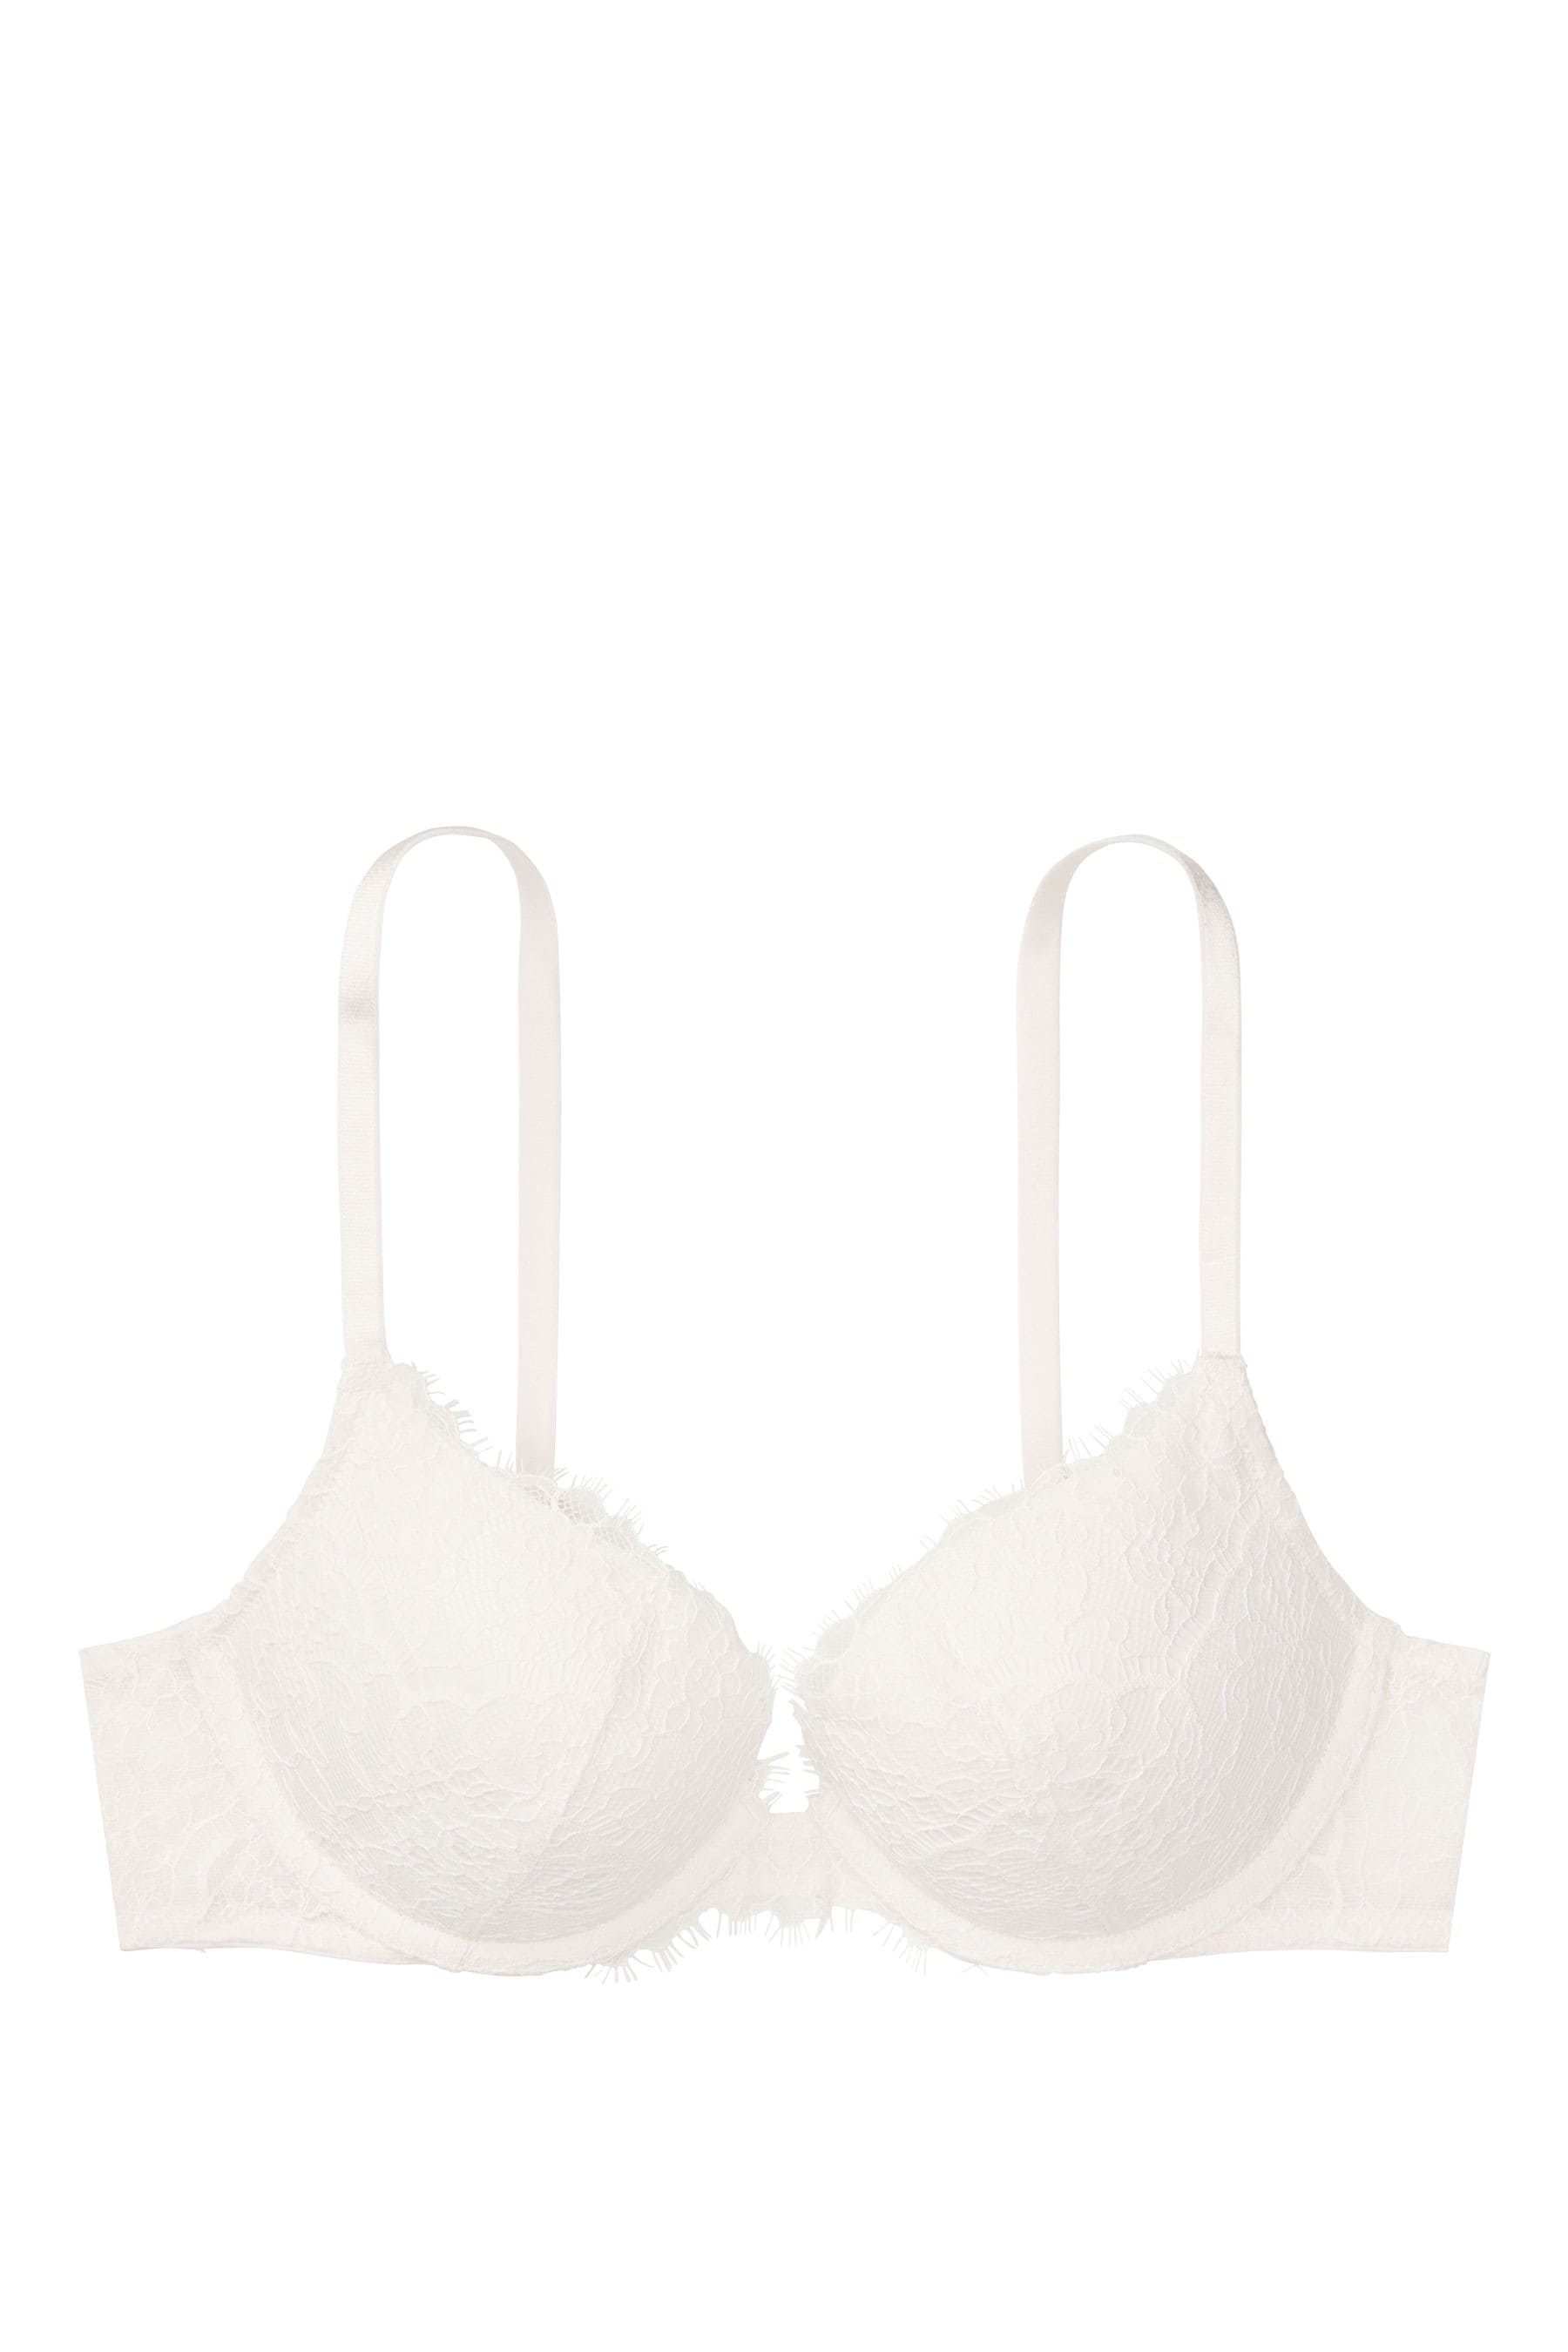 Buy Victoria's Secret Dream Angels Push-Up Bra from the Victoria's ...